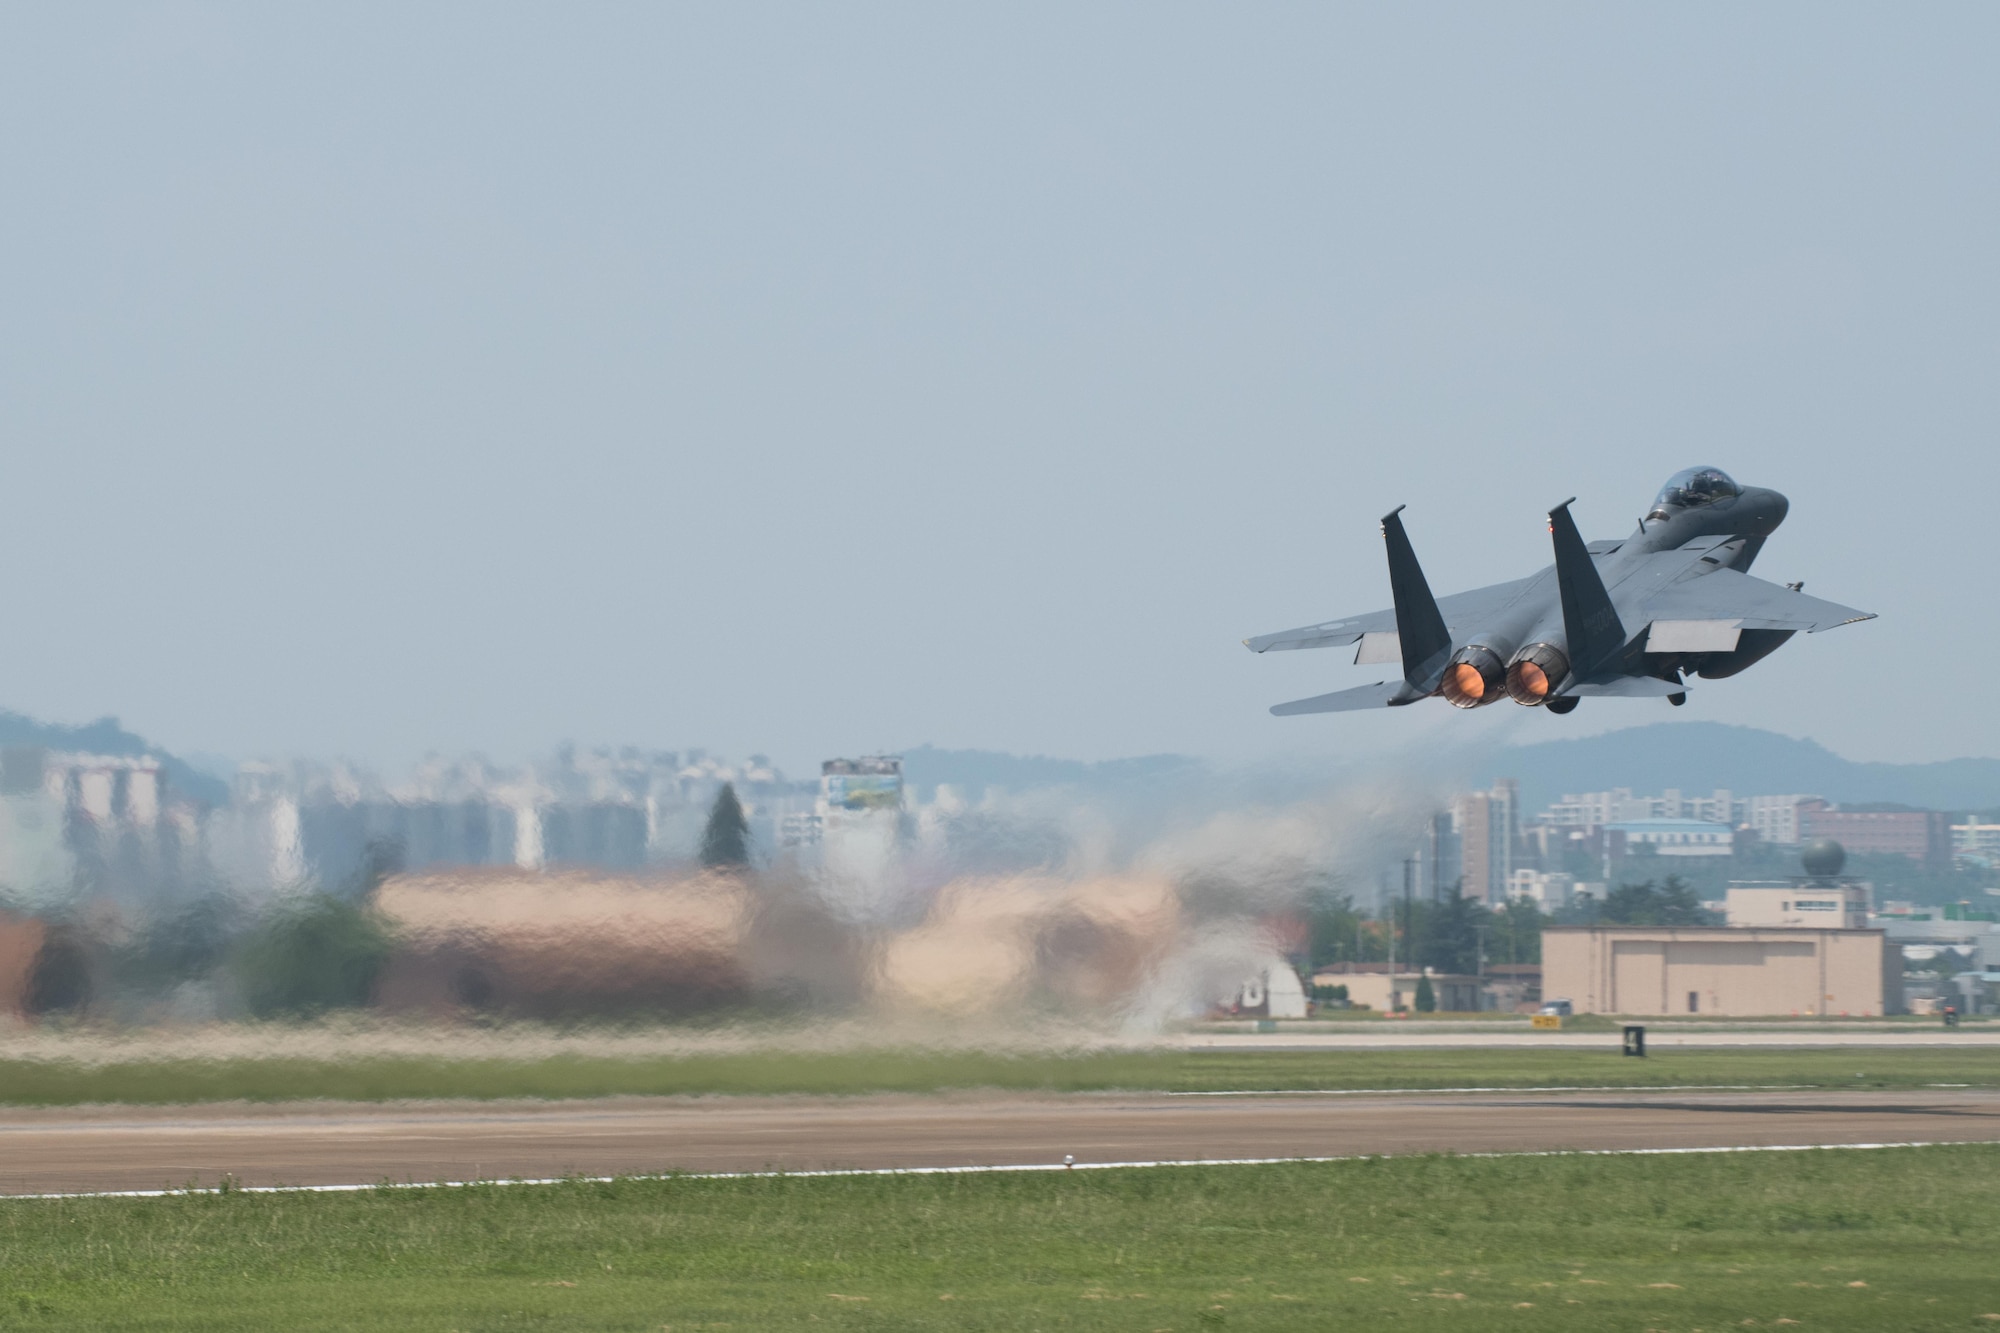 An F-15K Slam Eagle from the Republic of Korea air force’s 11th Fighter Wing takes off for Daegu’s airspace during Buddy Wing 16-7 at Daegu Air Base, ROK, Aug. 12, 2016. Buddy Wing is designed to introduce and review tactics, exchange ideas and improve the interoperability between U.S. and ROK air force pilots, maintainers and support personnel. (U.S. Air Force photo by Senior Airman Dillian Bamman)